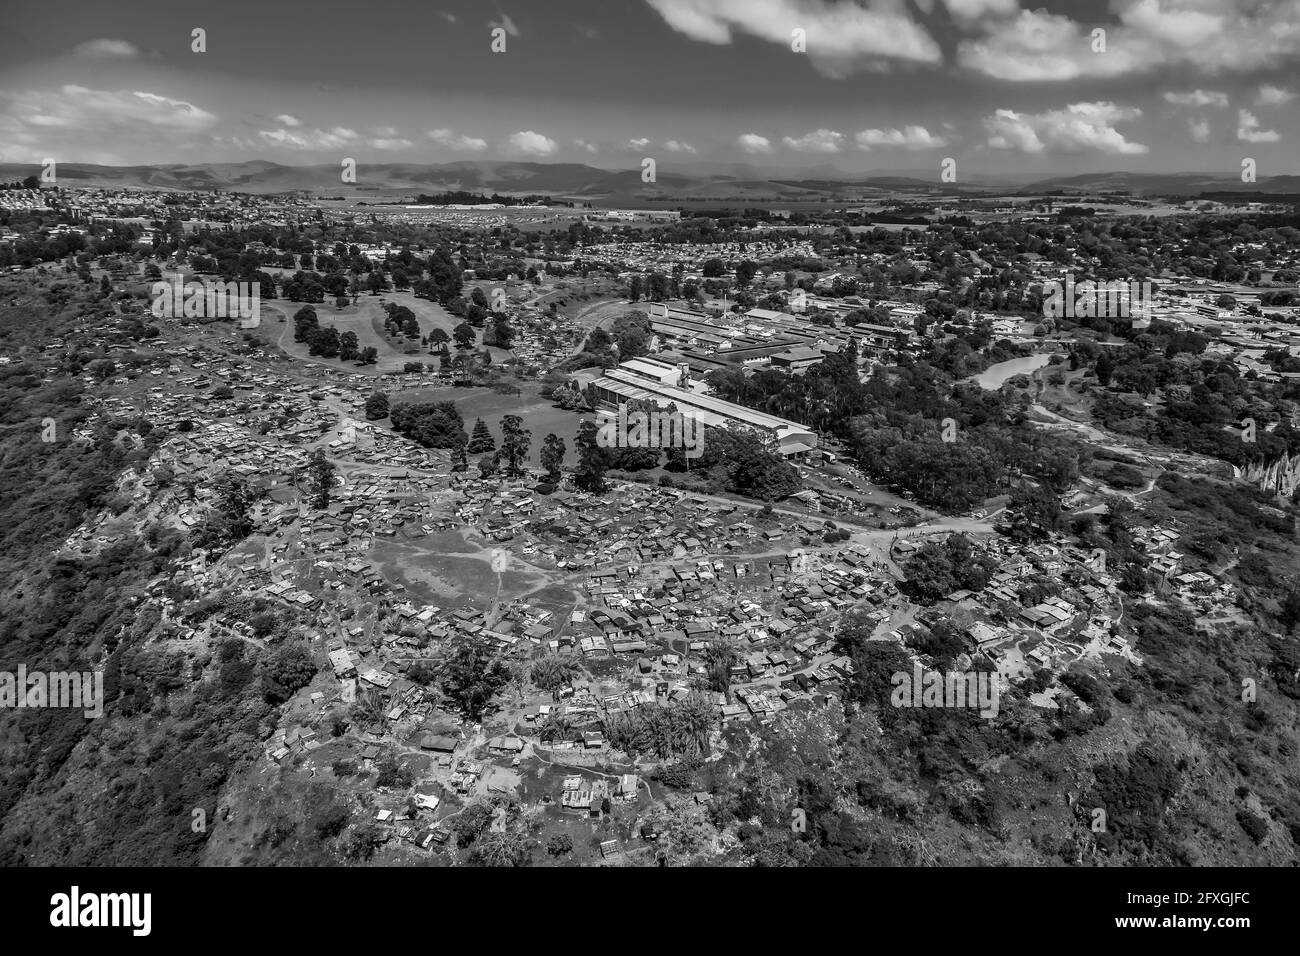 HOWICK, SOUTH AFRICA - Jan 05, 2021: Howick, South Africa, October 19, 2012, Aerial View of Low income housing near Howick Falls KwaZulu-Natal South A Stock Photo